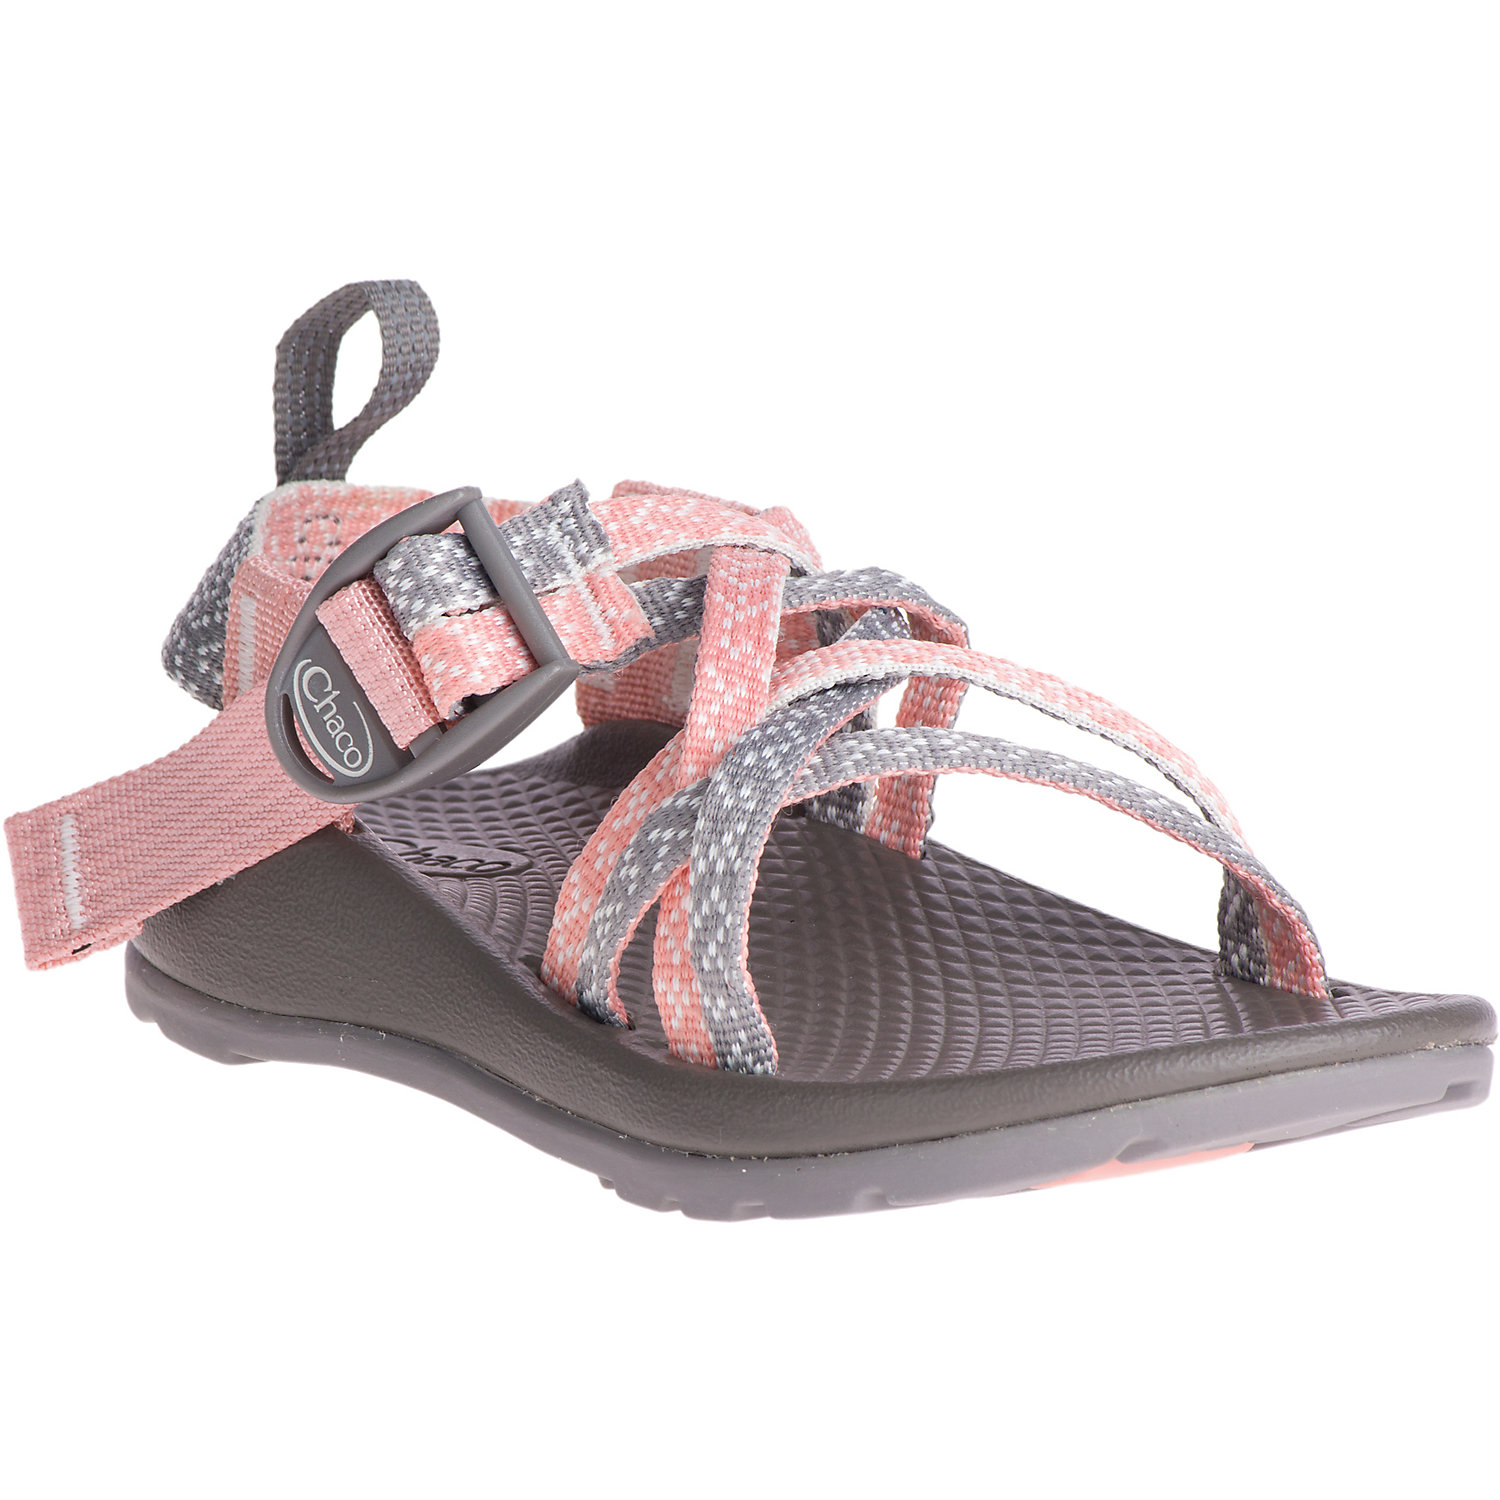 Chaco Kids ZX/1 Ecotread Sandal